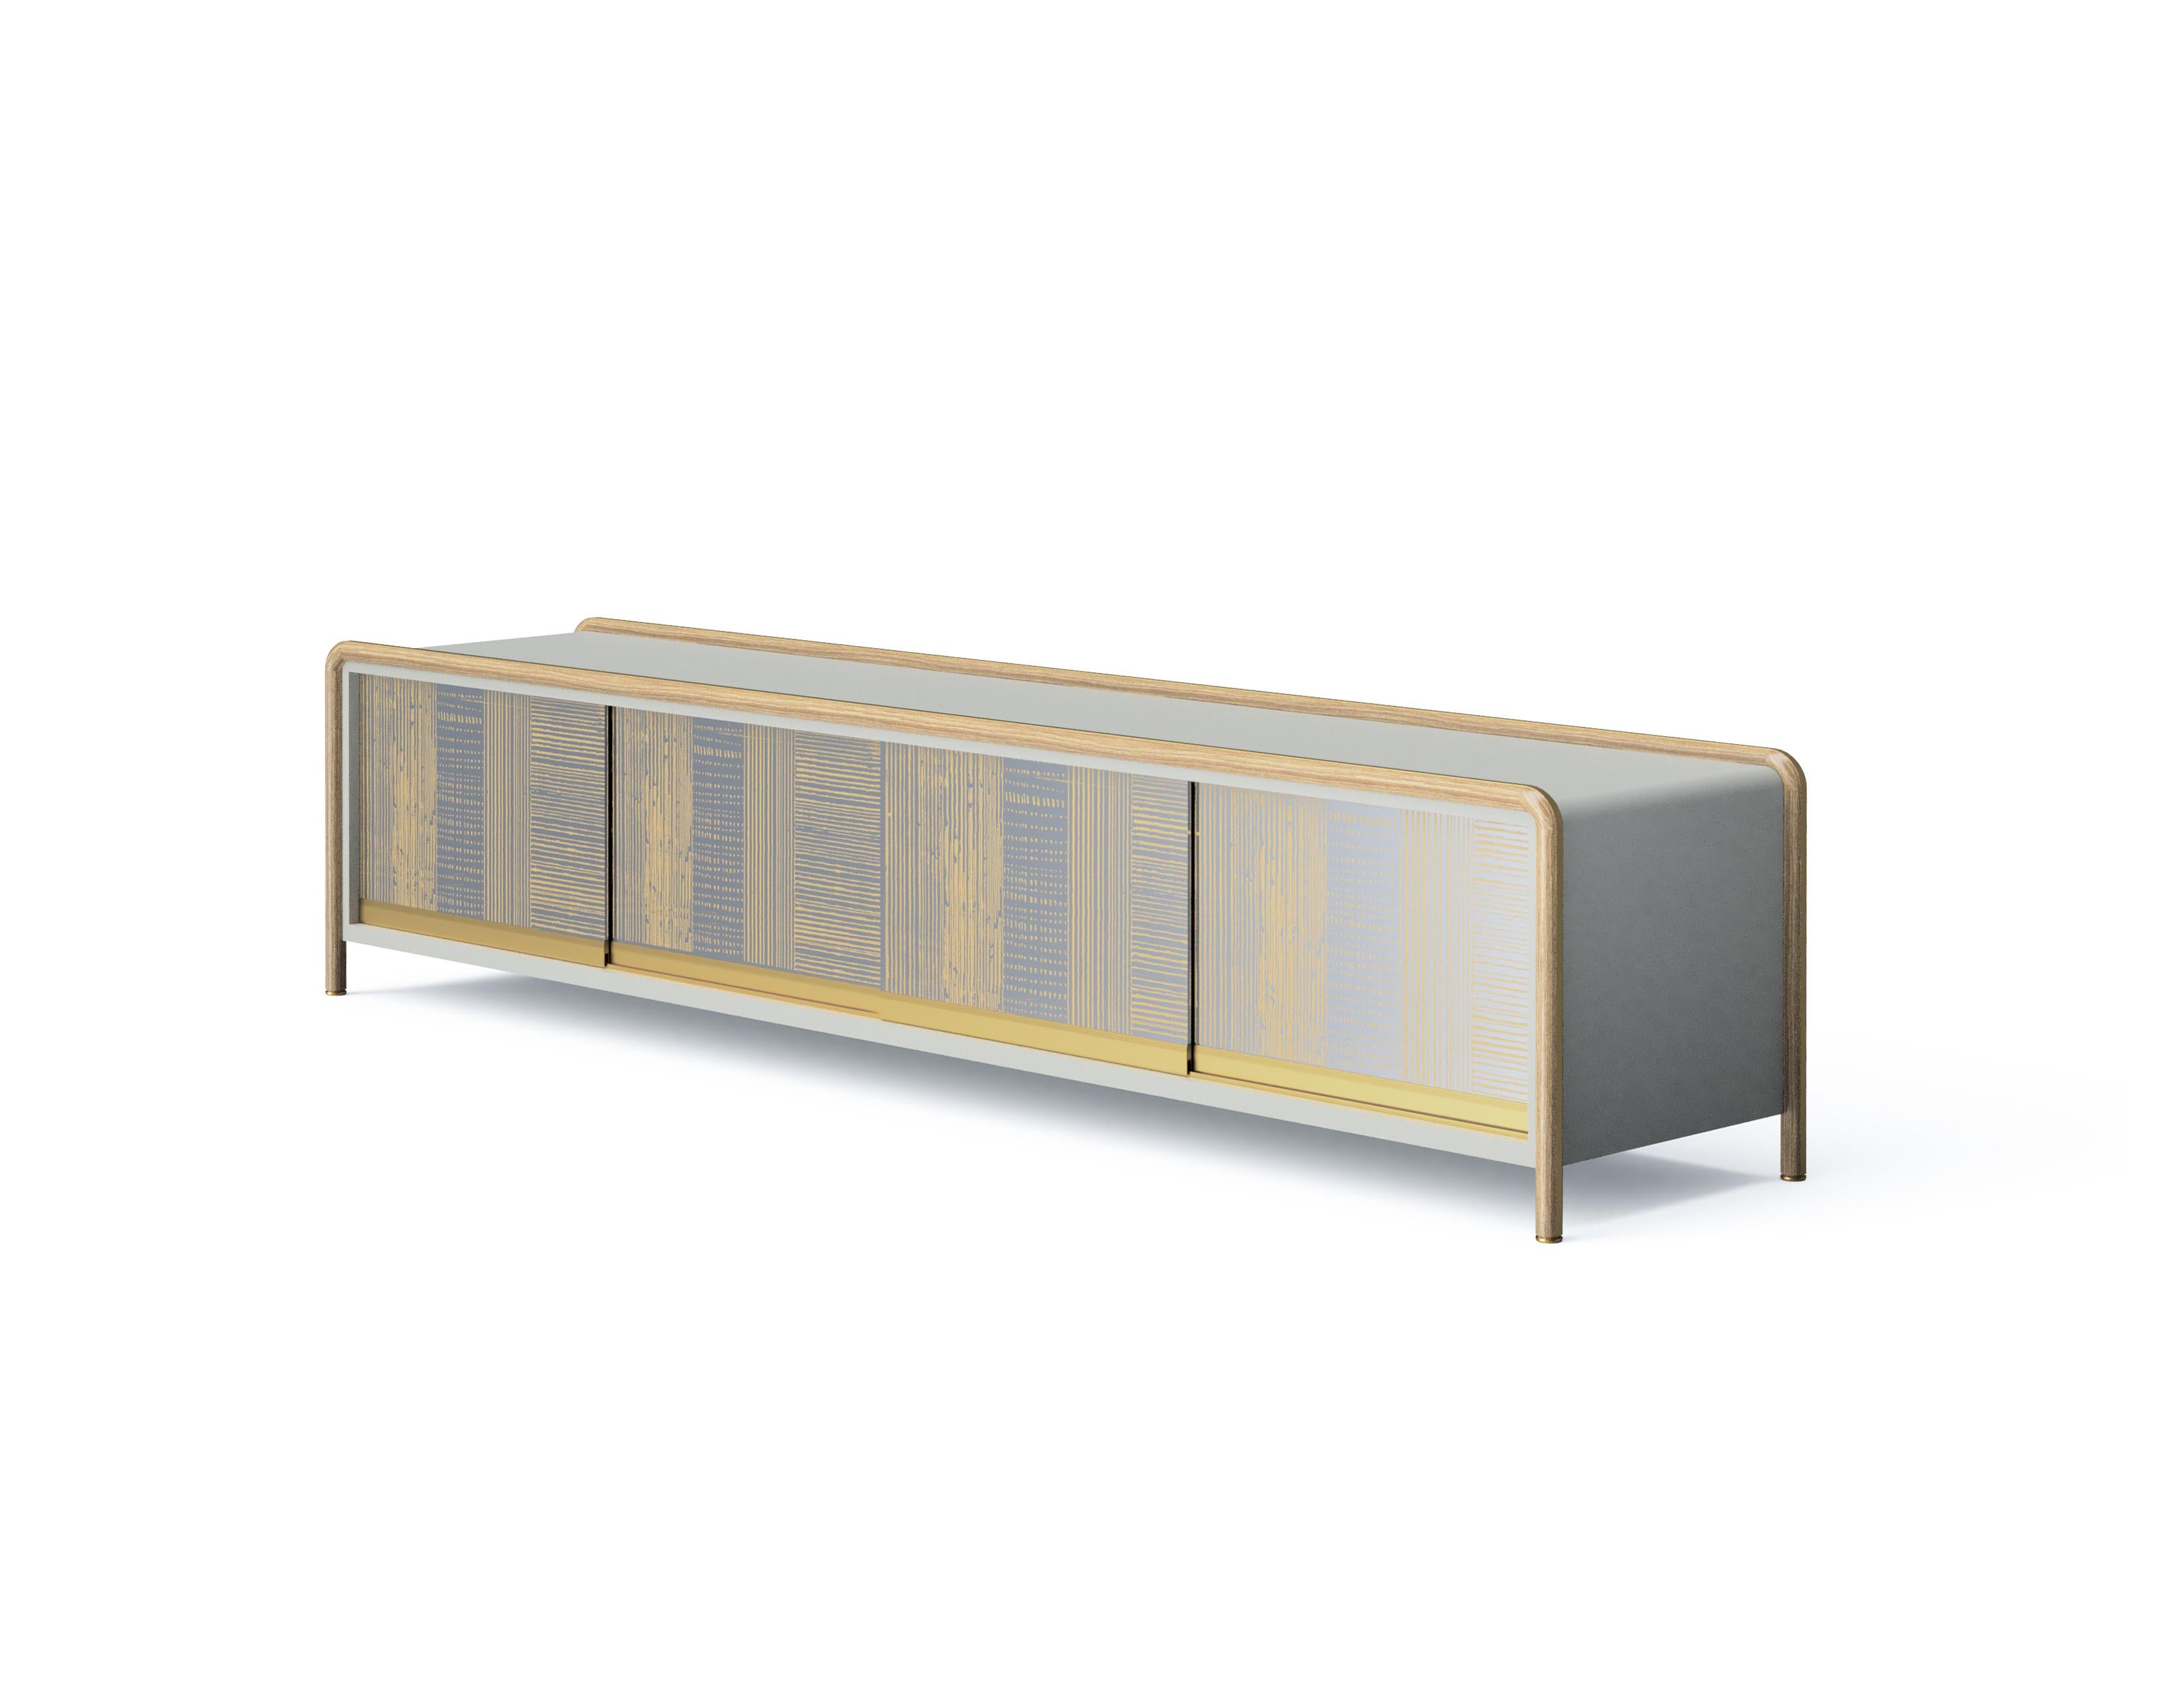 Manufactured using the woodturning technique, the solid wood , gently wraps around the top of the unit and come down to form the unit’s feet. The lacquered body adds serenity to ‘Sam’, which has versions with drawers and sliding doors.
‘Sam TV Unit’